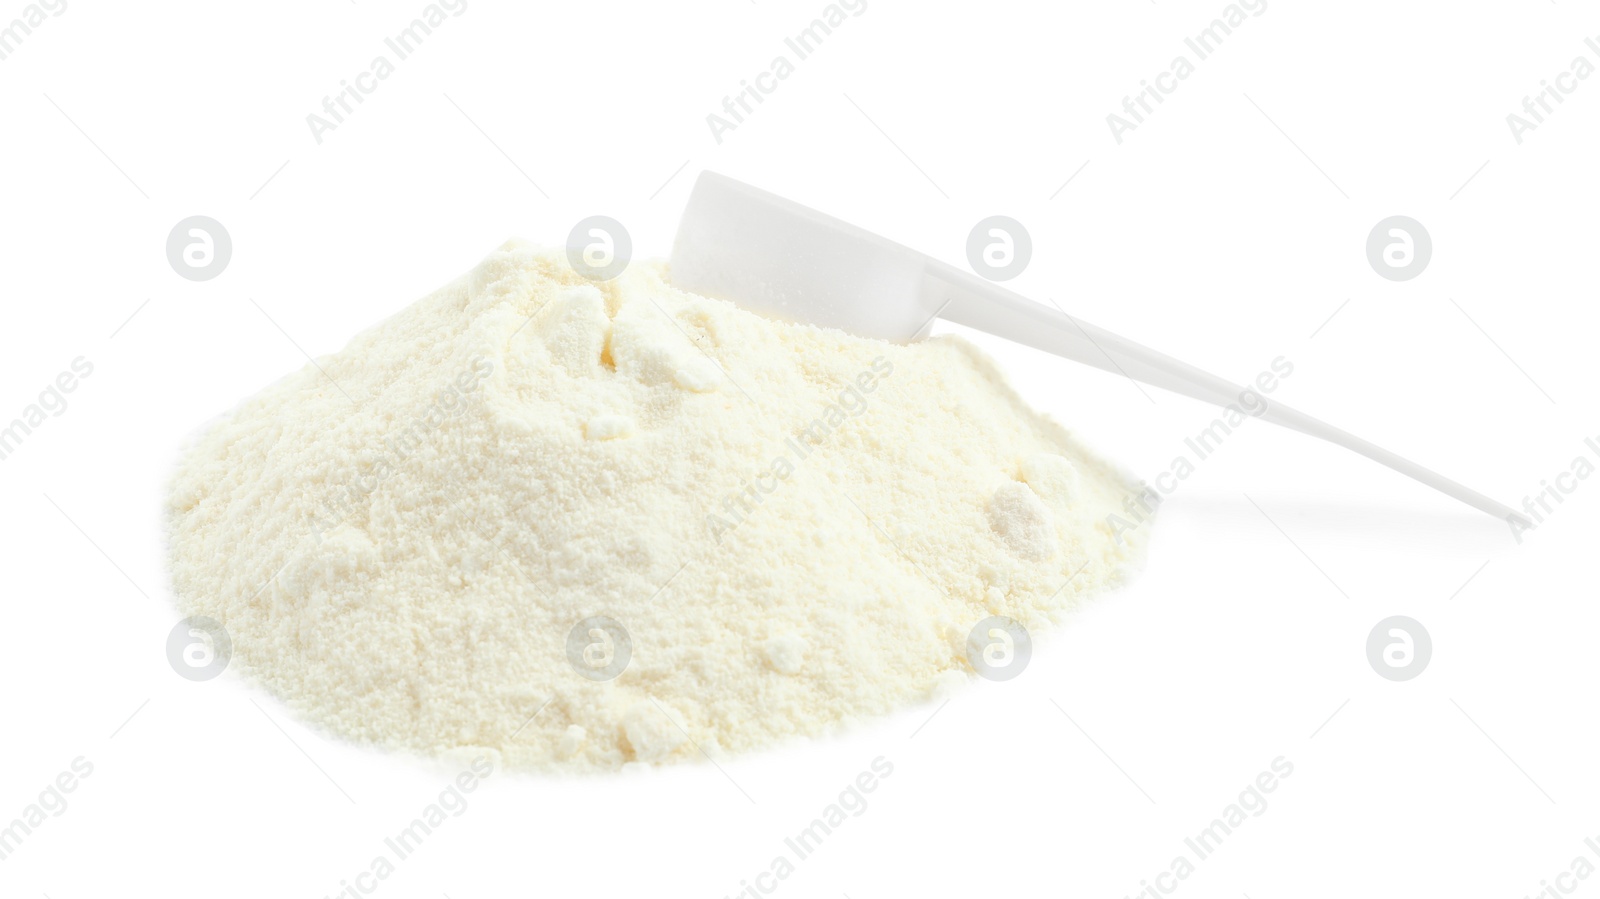 Photo of Pile of protein powder and scoop isolated on white